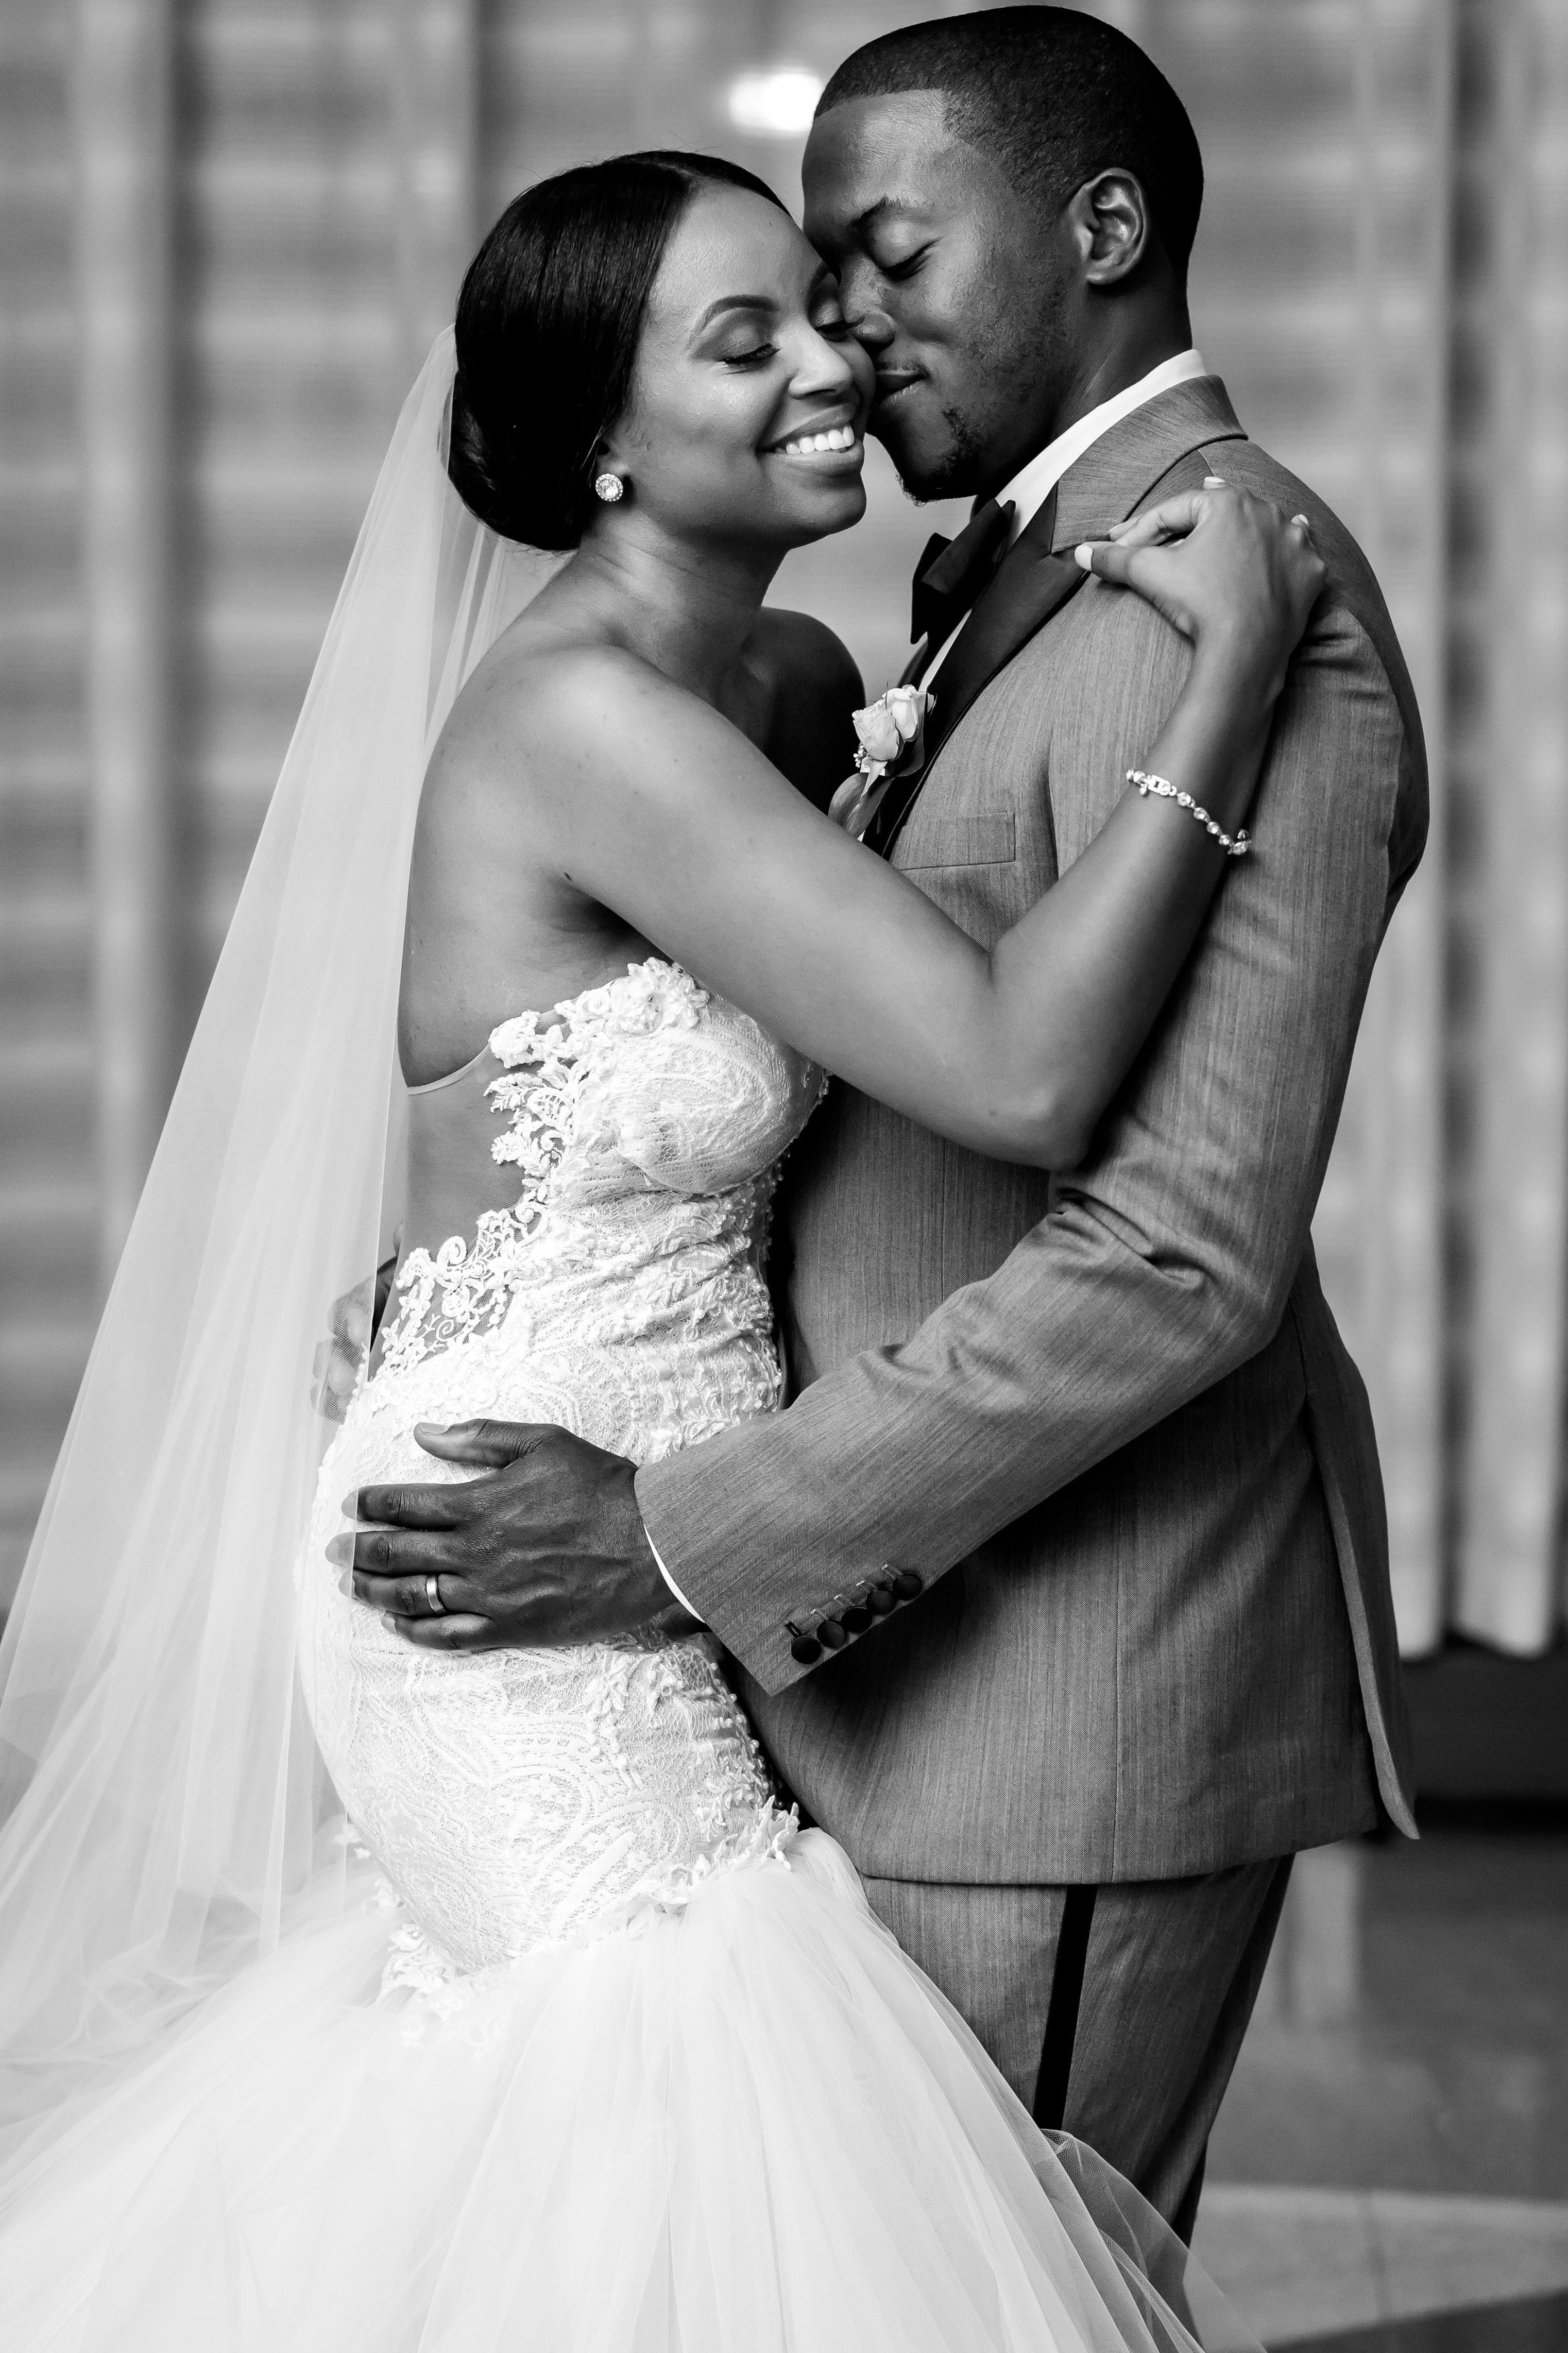 Bridal Bliss: Elo and Lauren's Glam Wedding Will Stop You In Your Tracks
